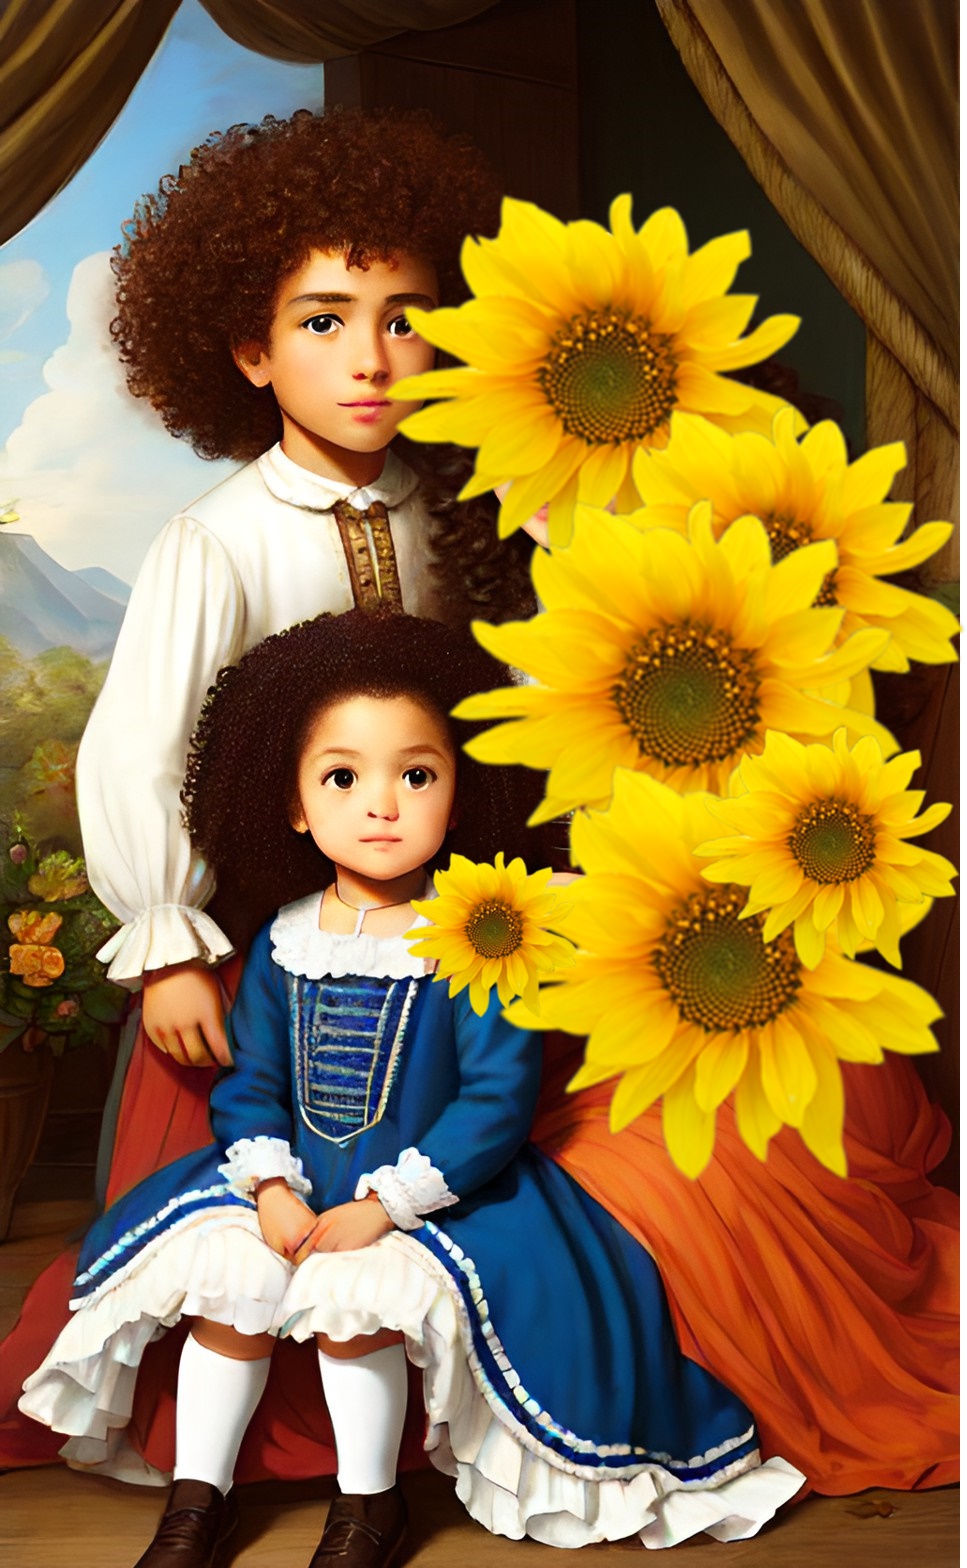 mixed race children with parents Dream_94